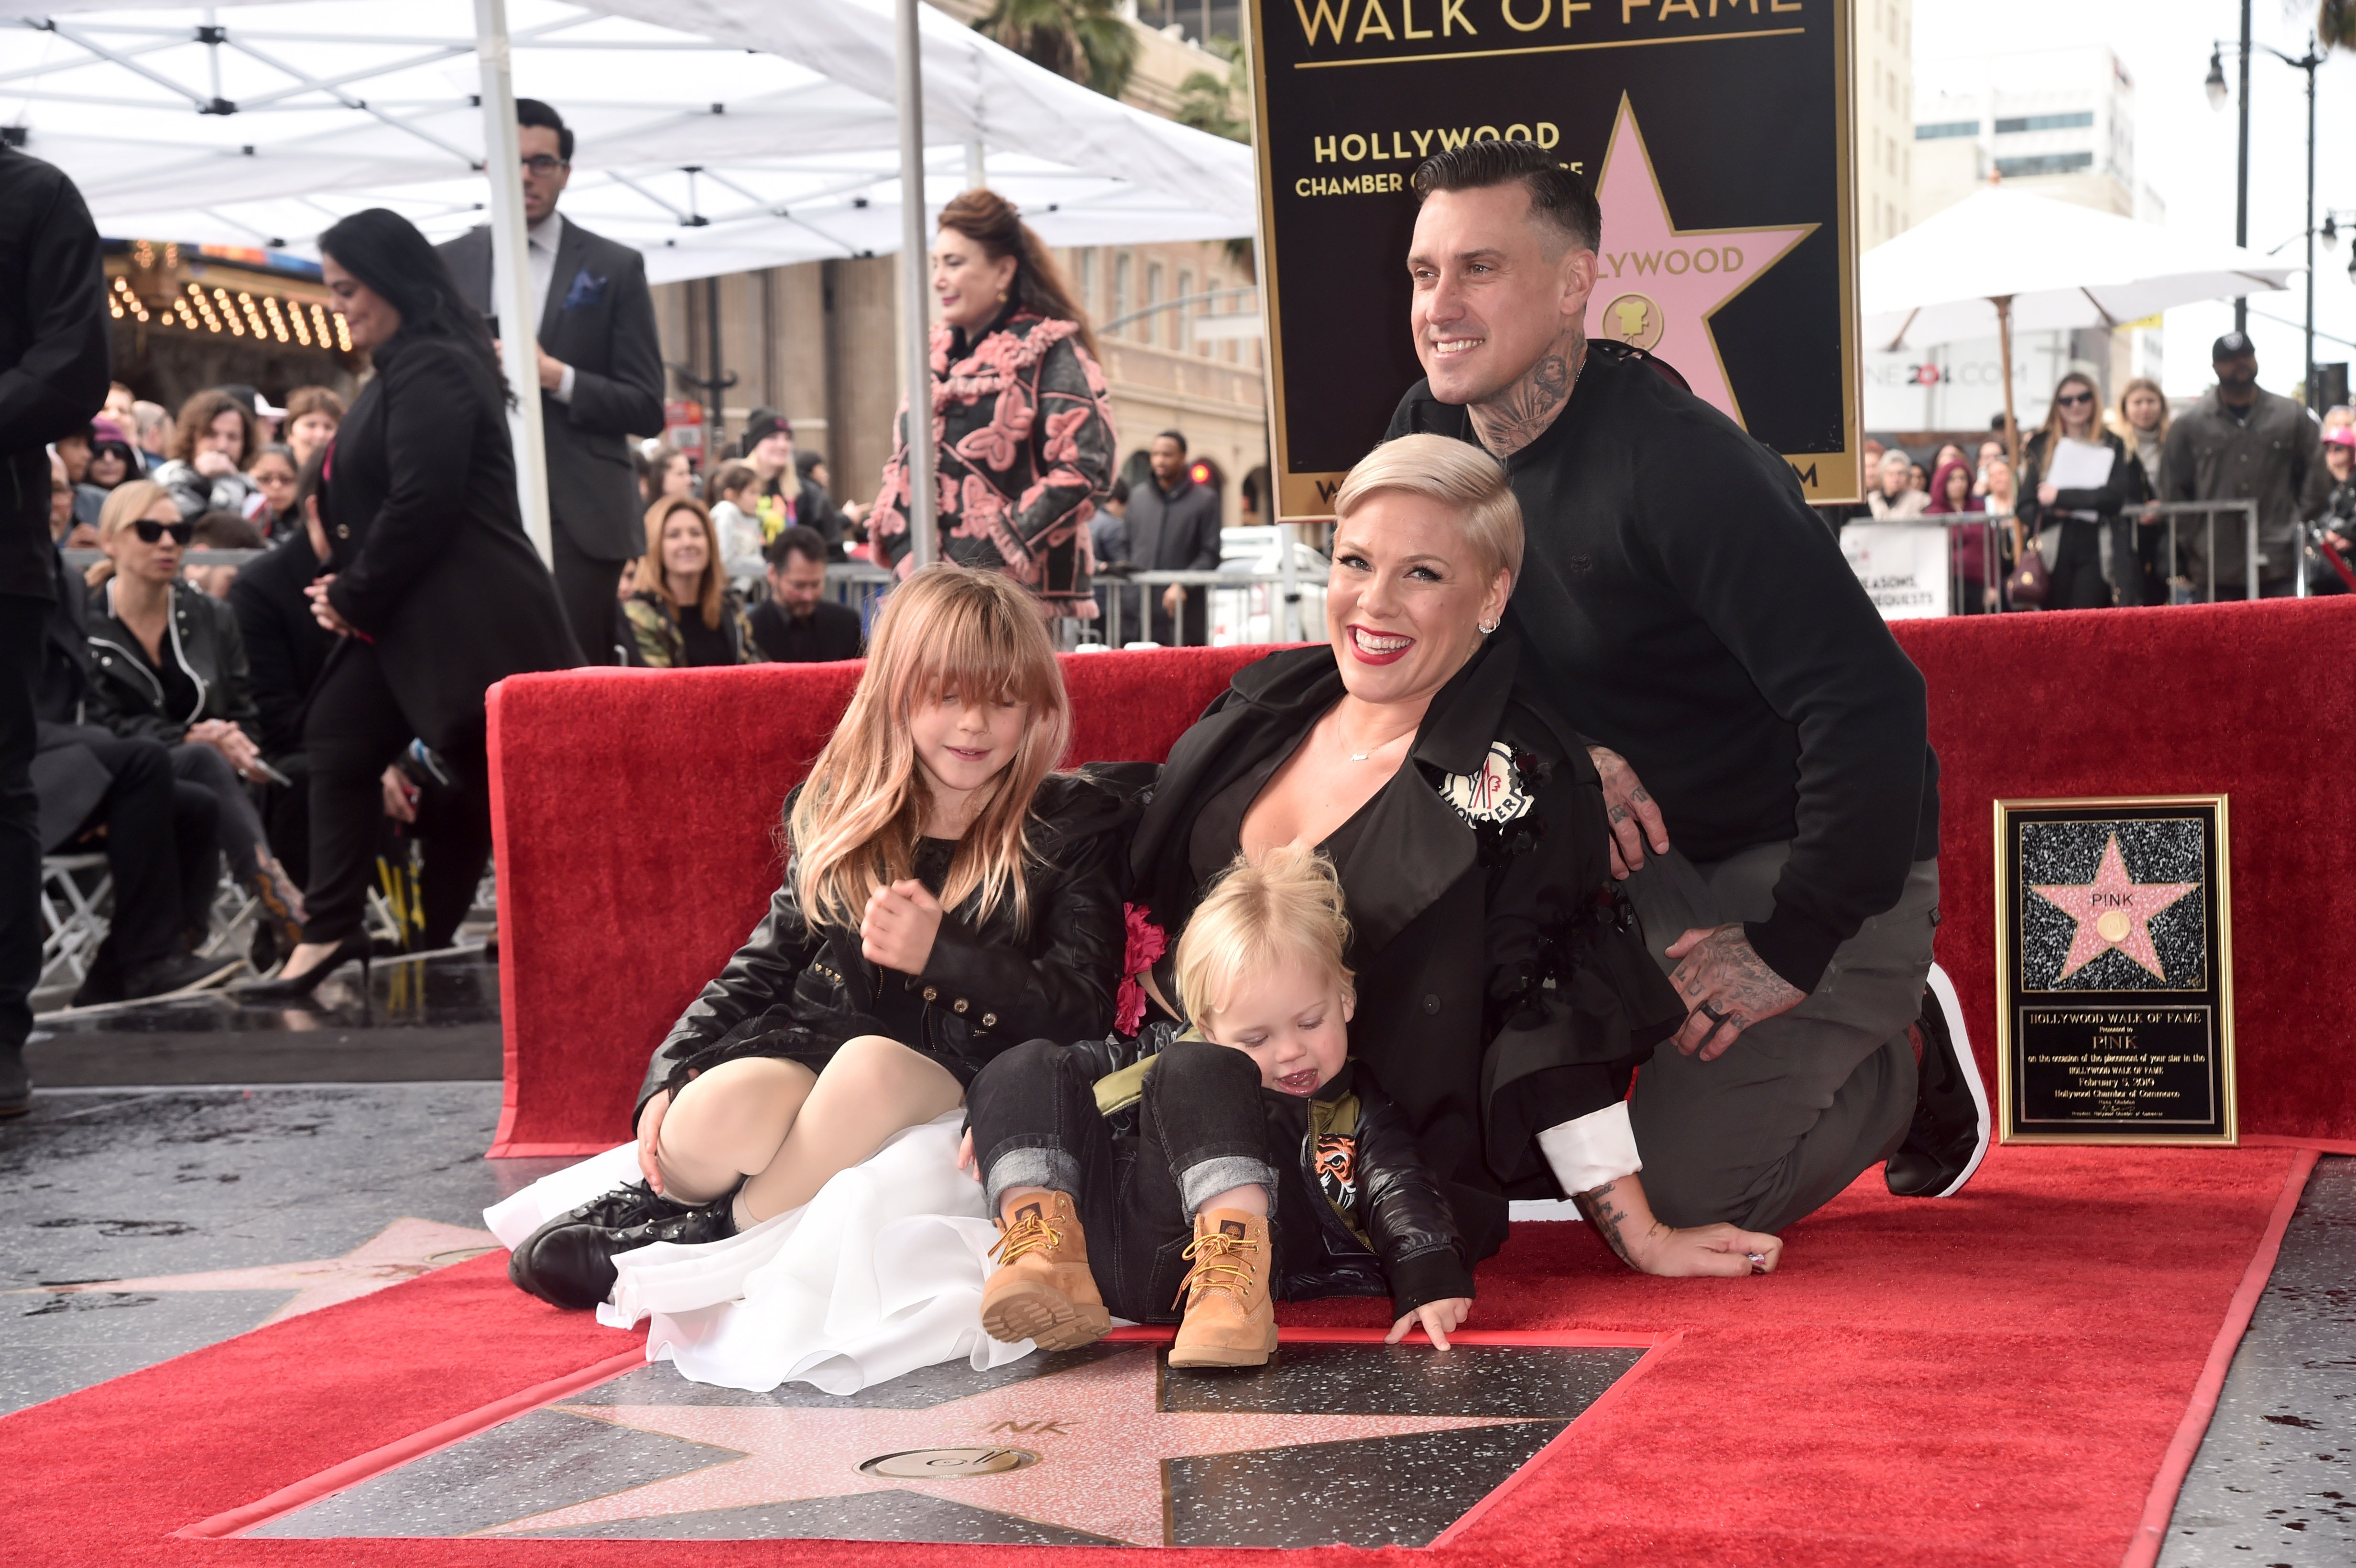 Pink receiving her Hollywood Walk of Fame Star accompanied by her children and husband | Photo: Getty Images